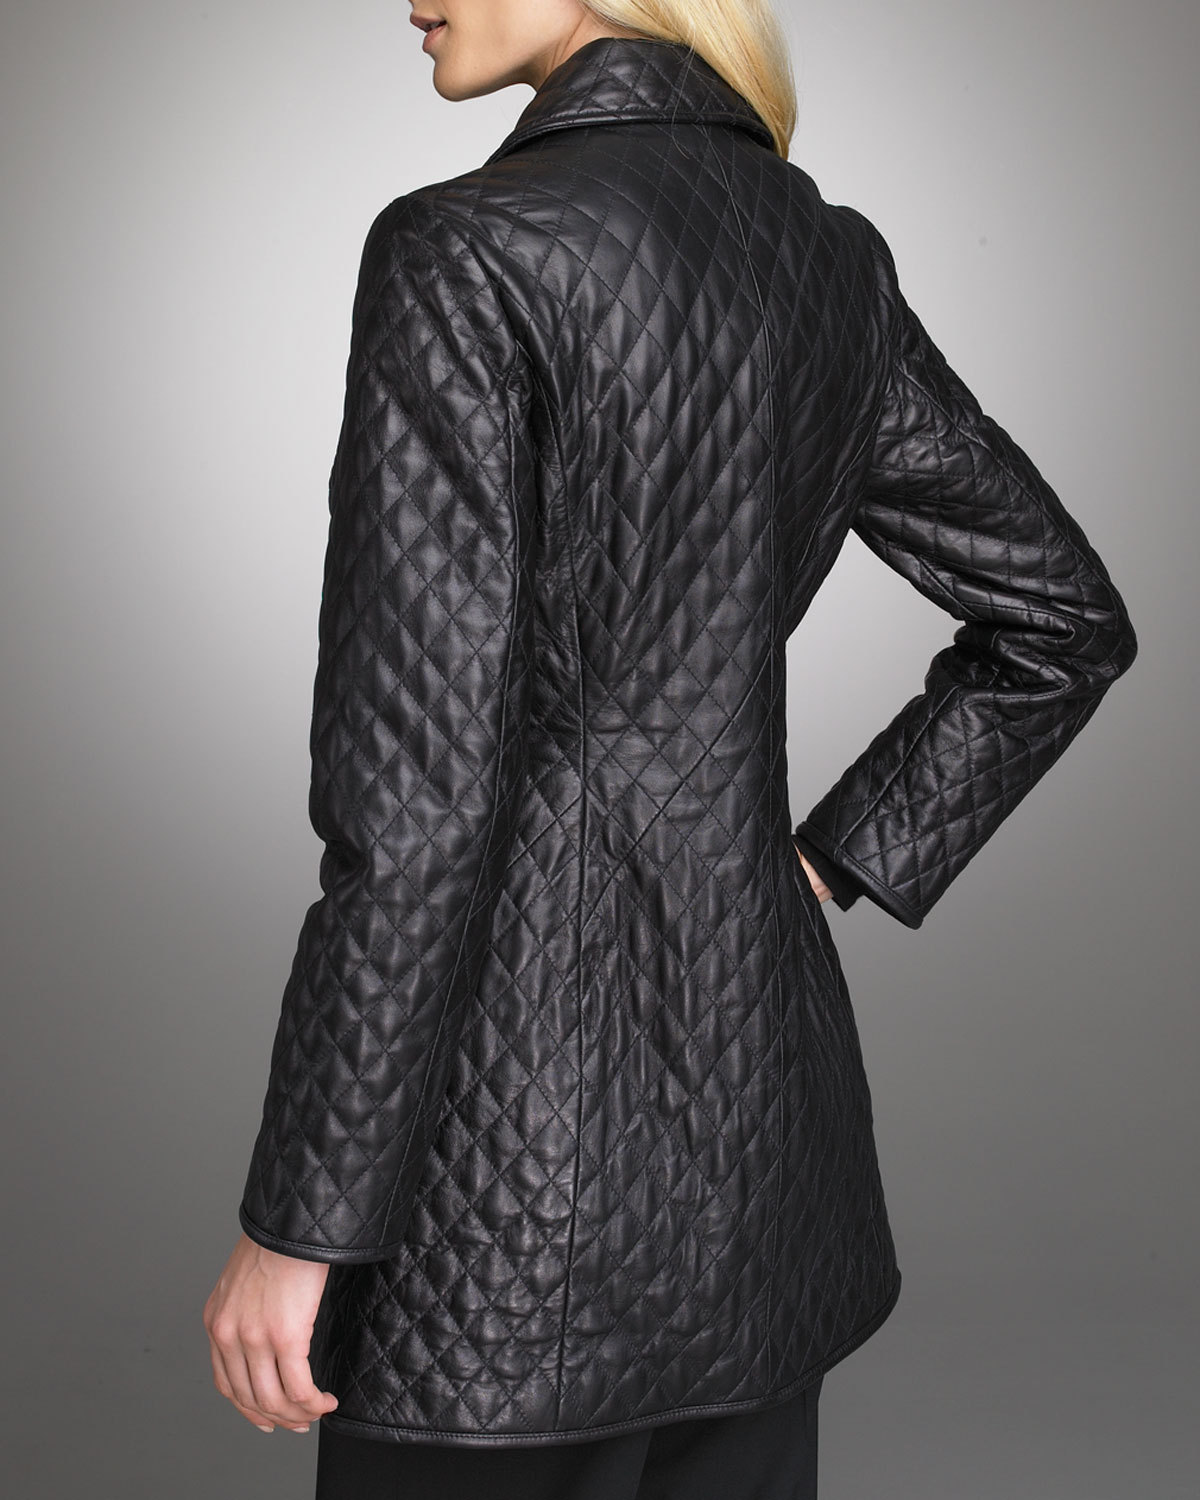 Womens black quilted leather coat, Women quilted leather jacket, womens ...